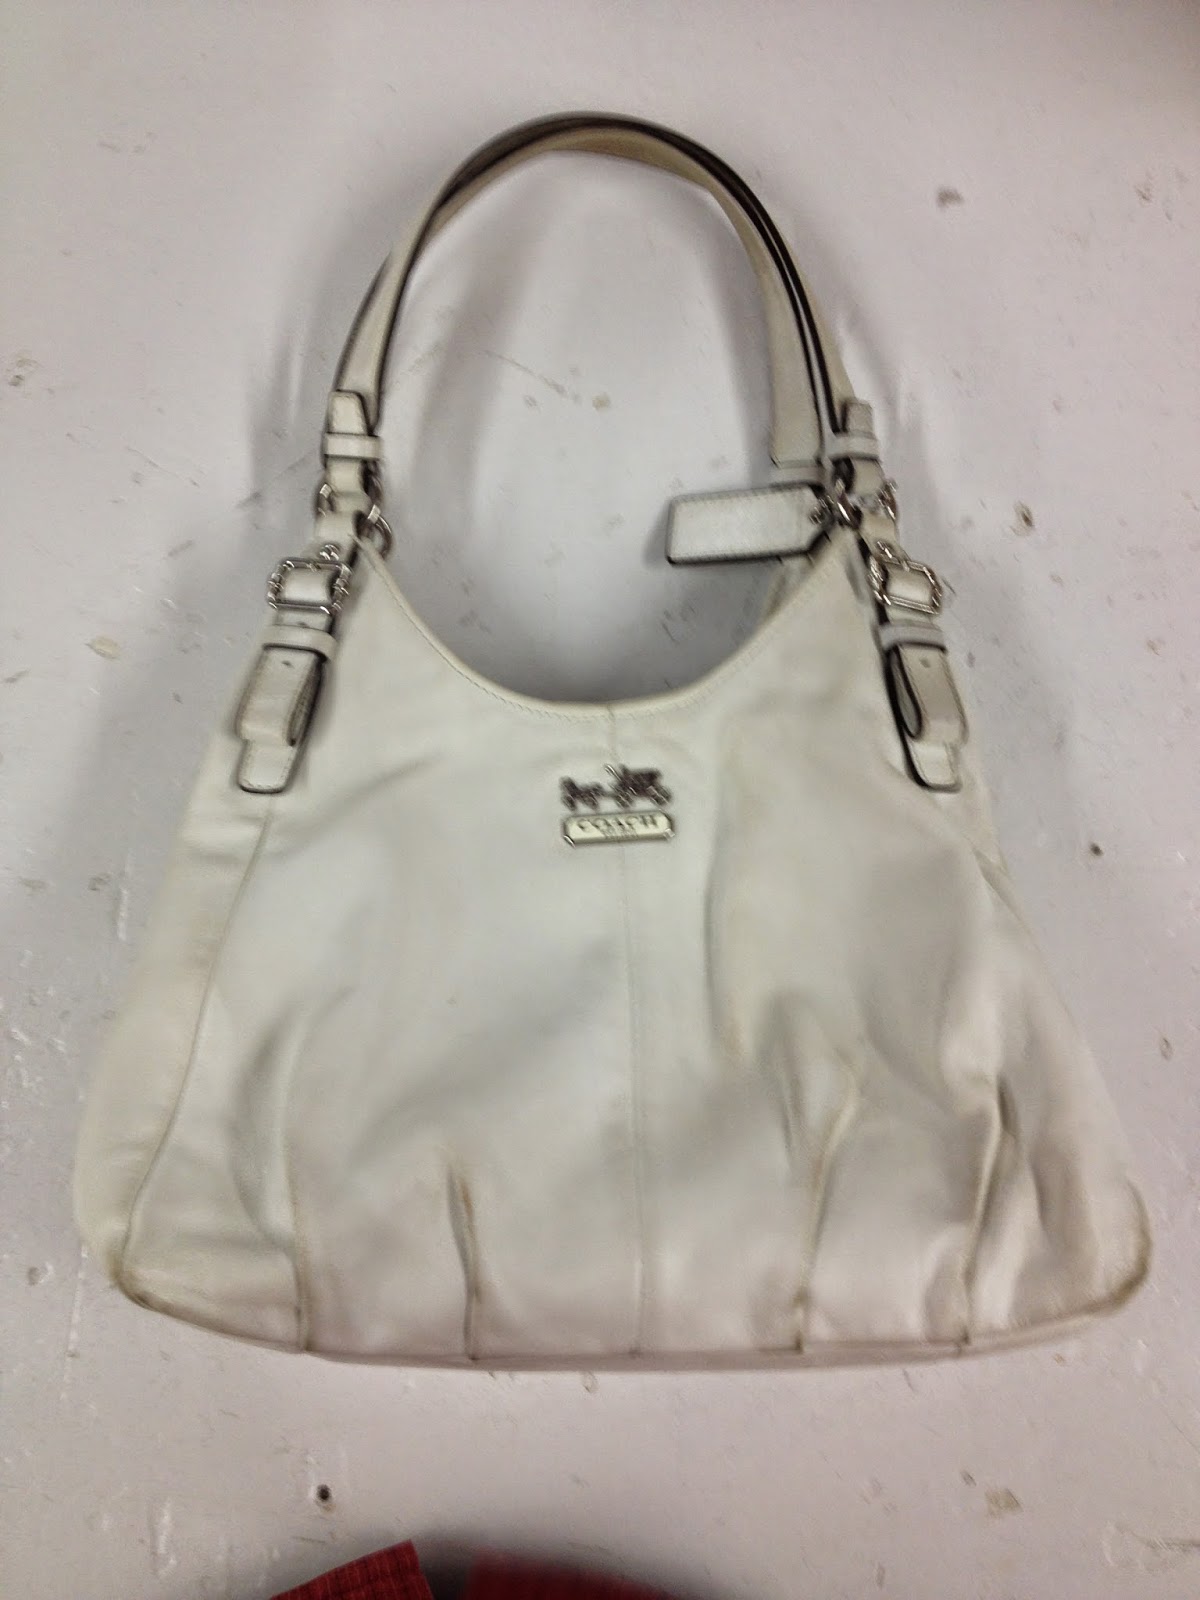 Leather Cleaning, Re-dyeing and Restoration: White Leather Coach Handbag Restored